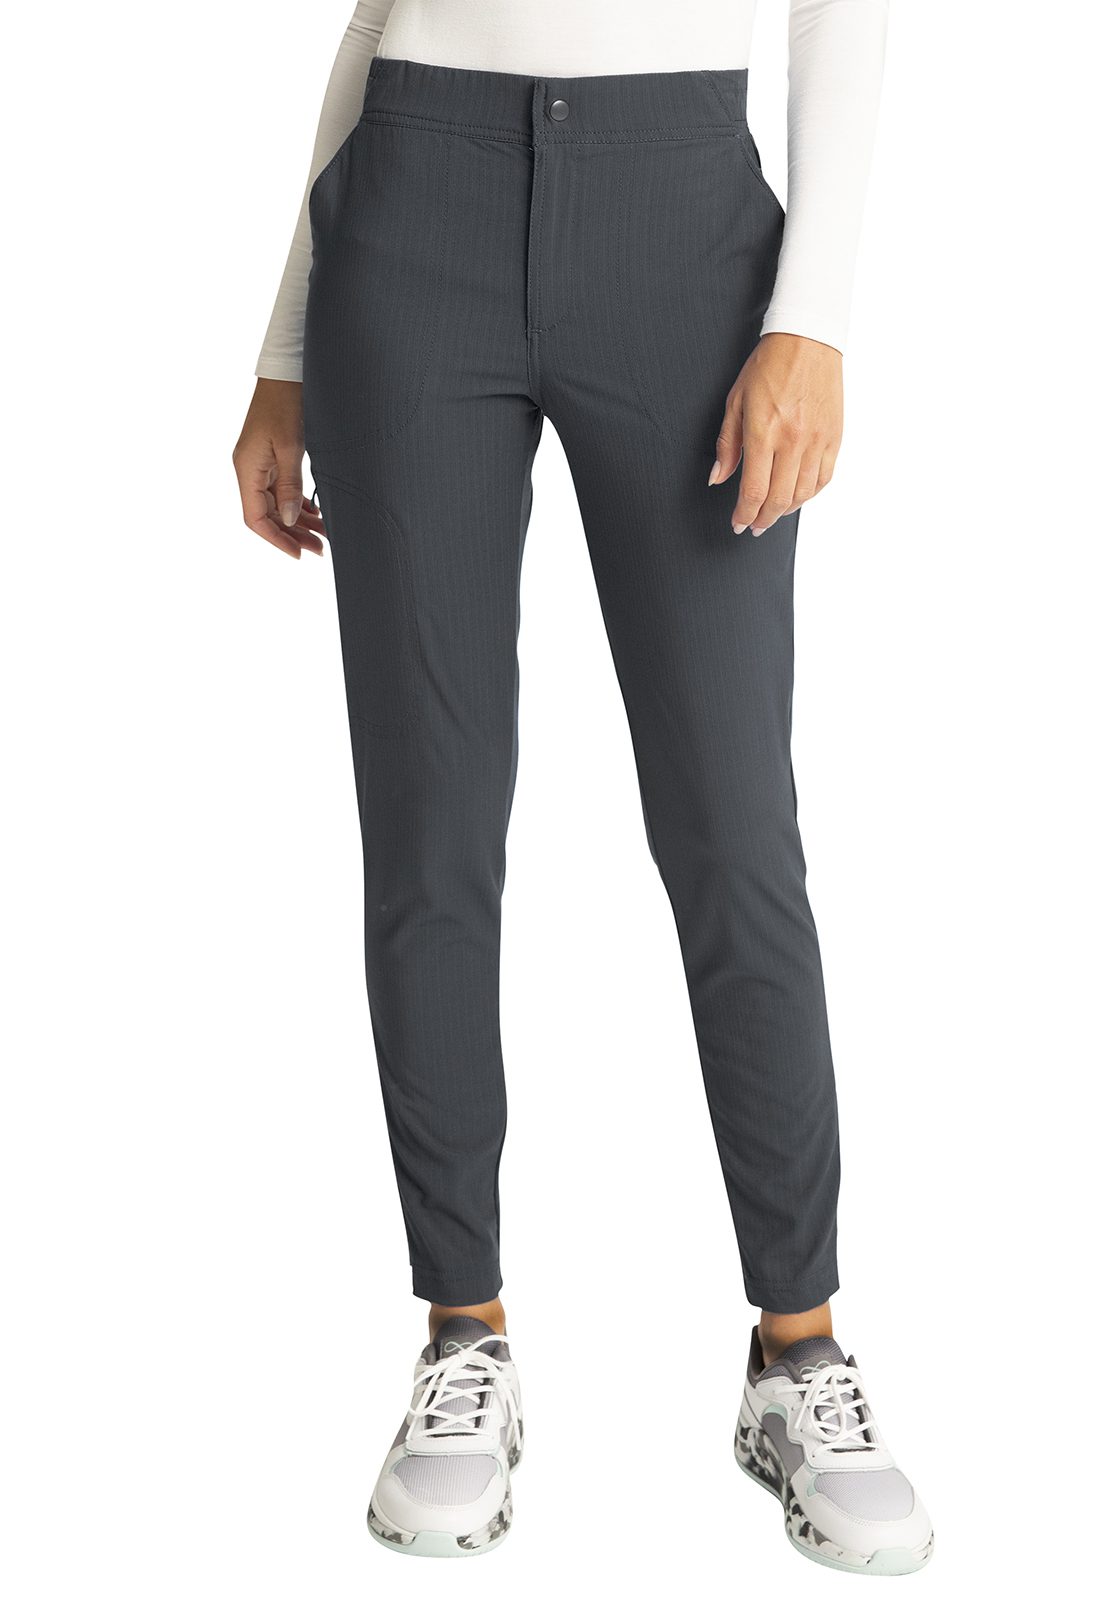 Women's Zip Fly Front Tapered Leg Pant